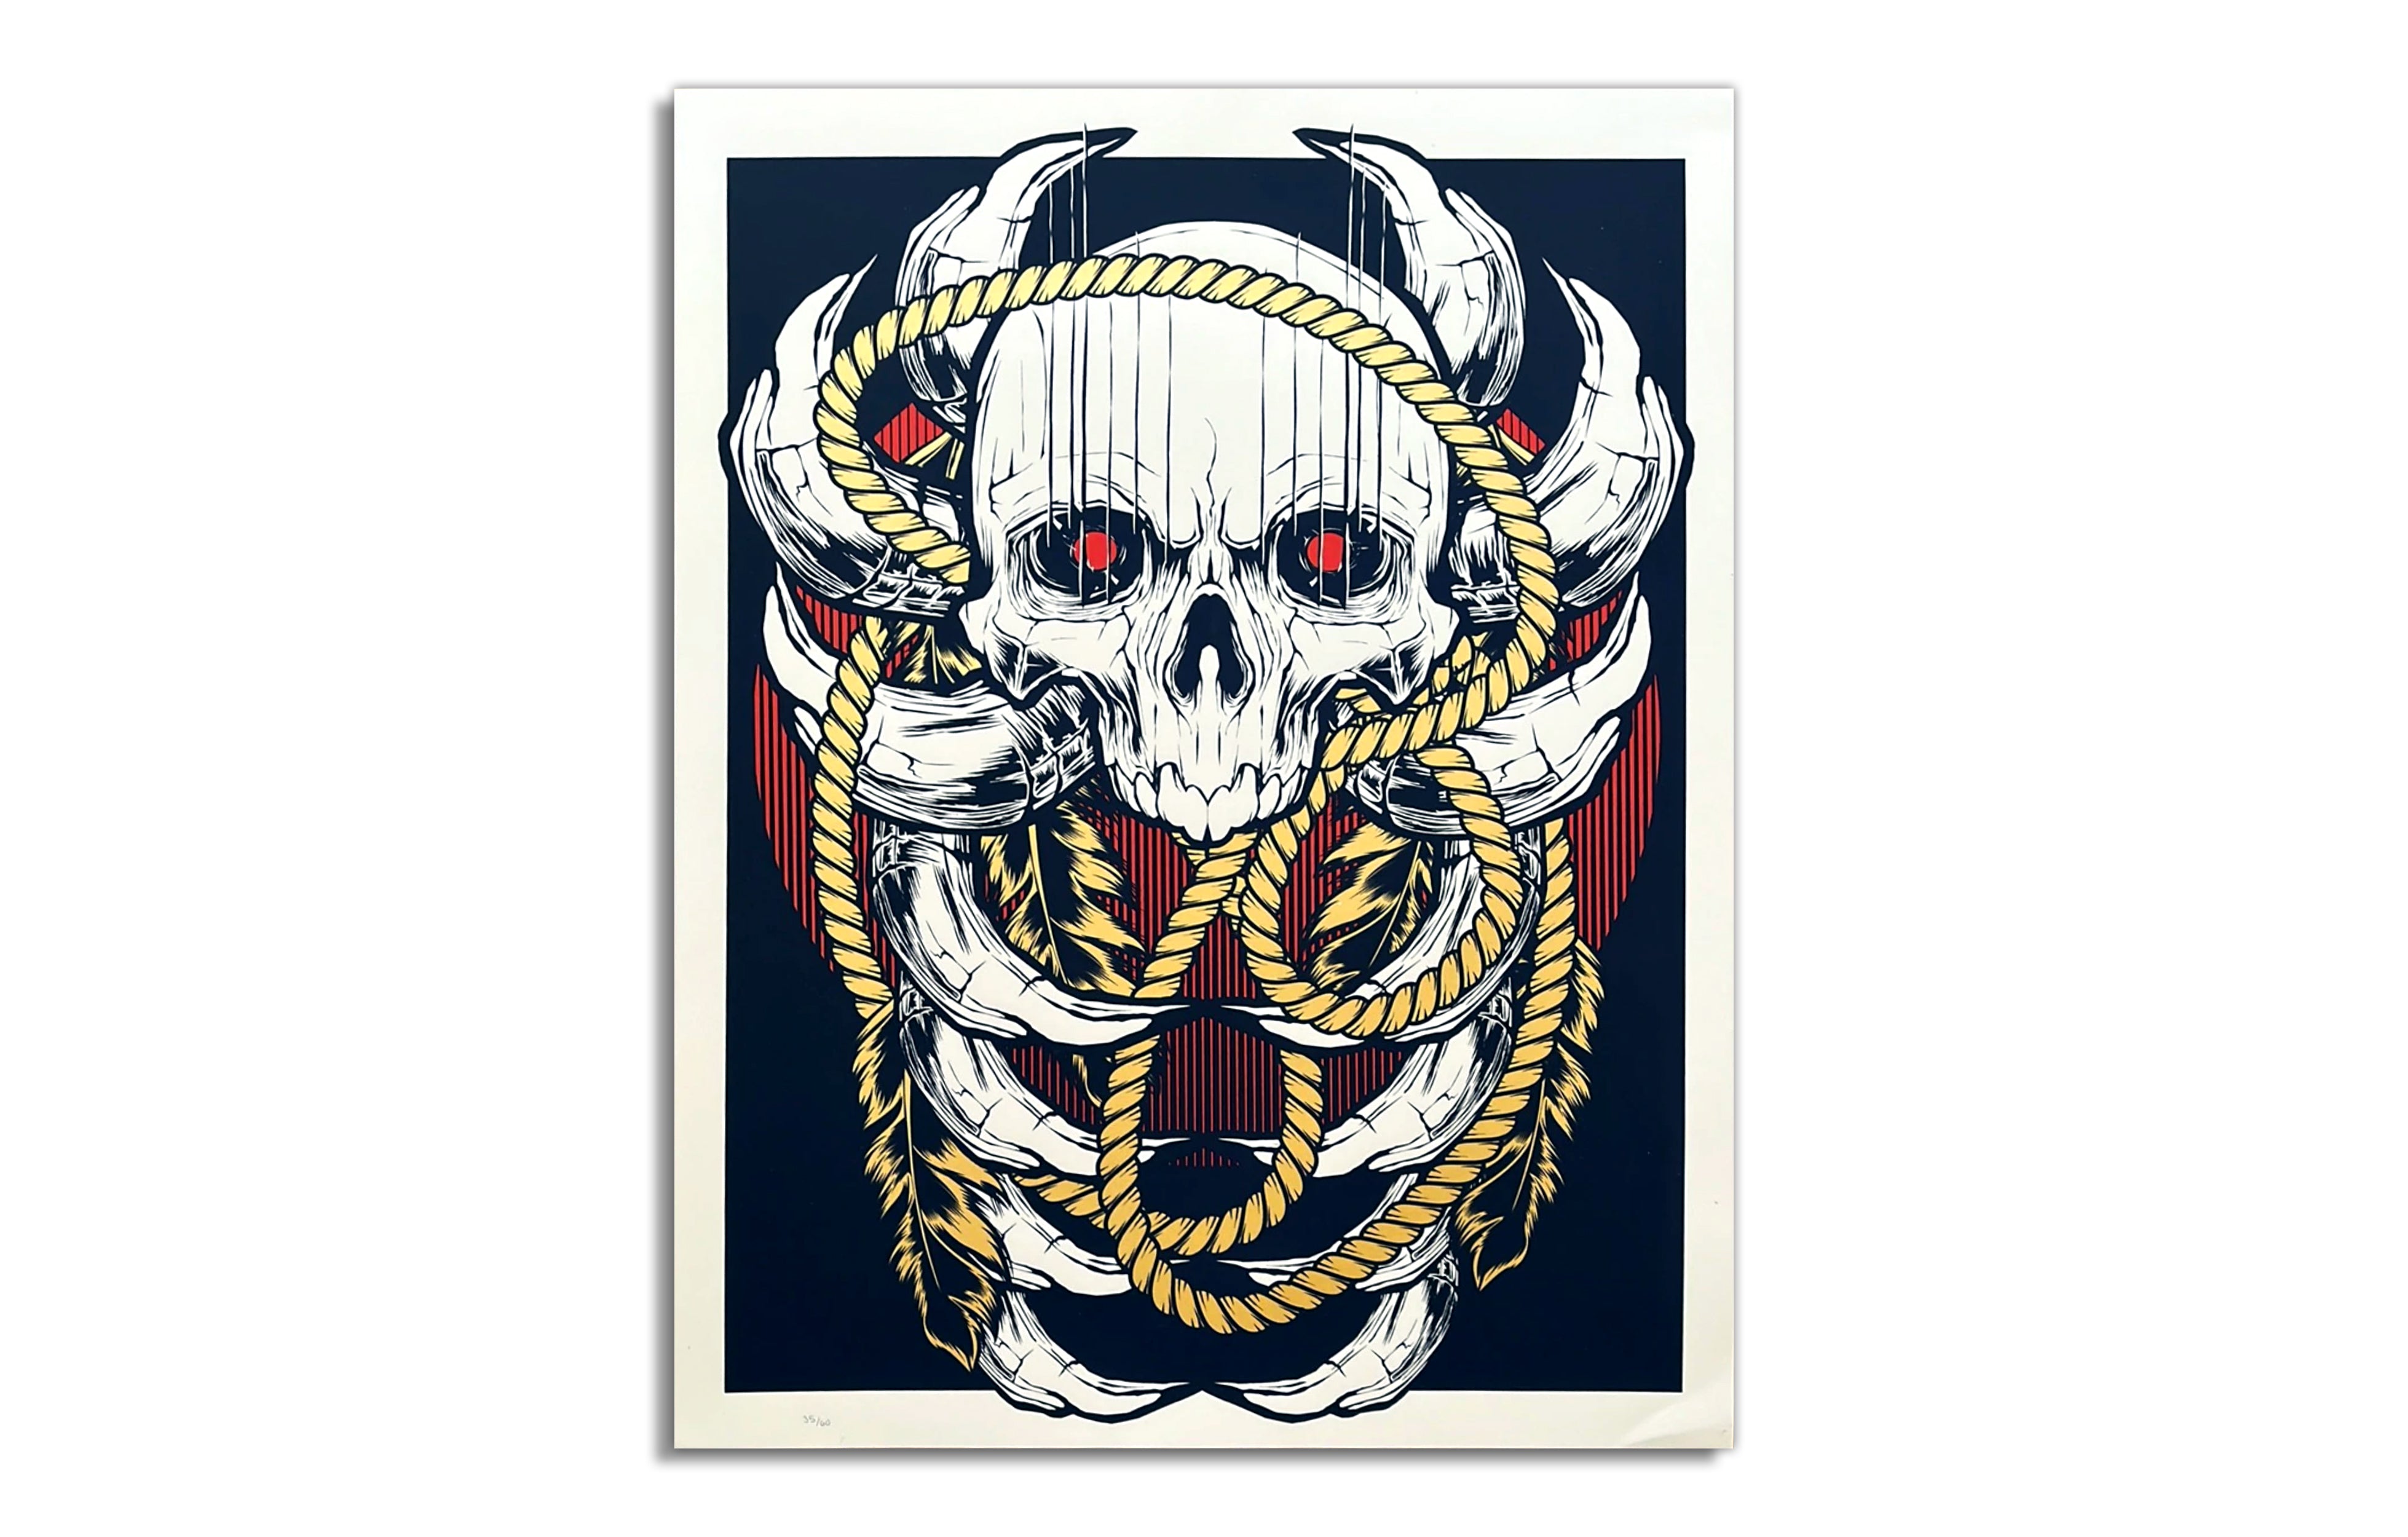 Skull Thing' a' ma' jig by Hydro74 - Galerie F